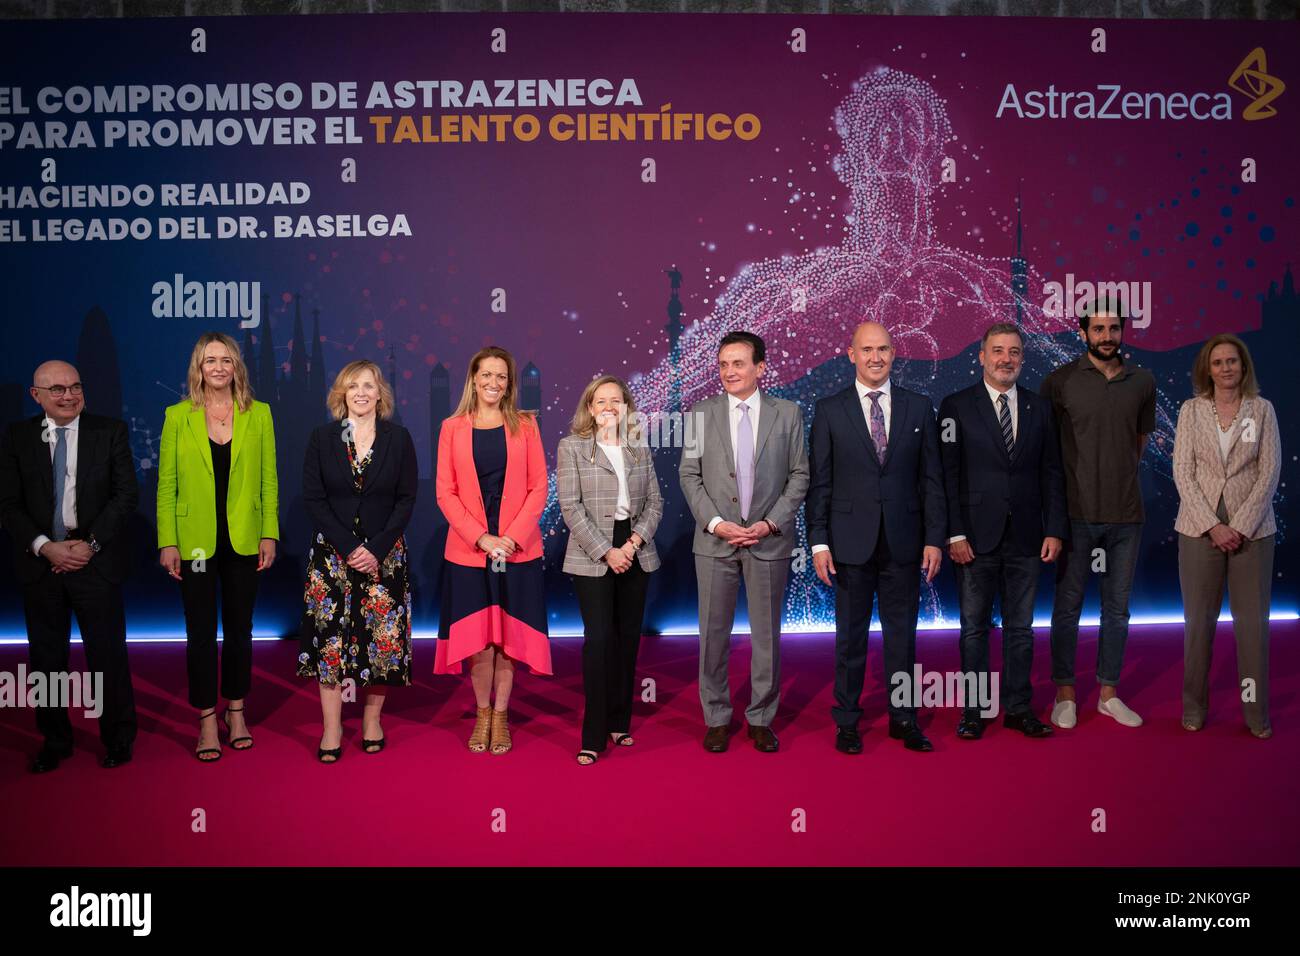 L-R) Family photo, the director of Vall d'Hebron Institute of Oncology  (VHIO), Josep Tabernero; the director of Corporate Affairs of Market Access  of Astrazeneca Spain, Marta Moreno; the executive vice president of